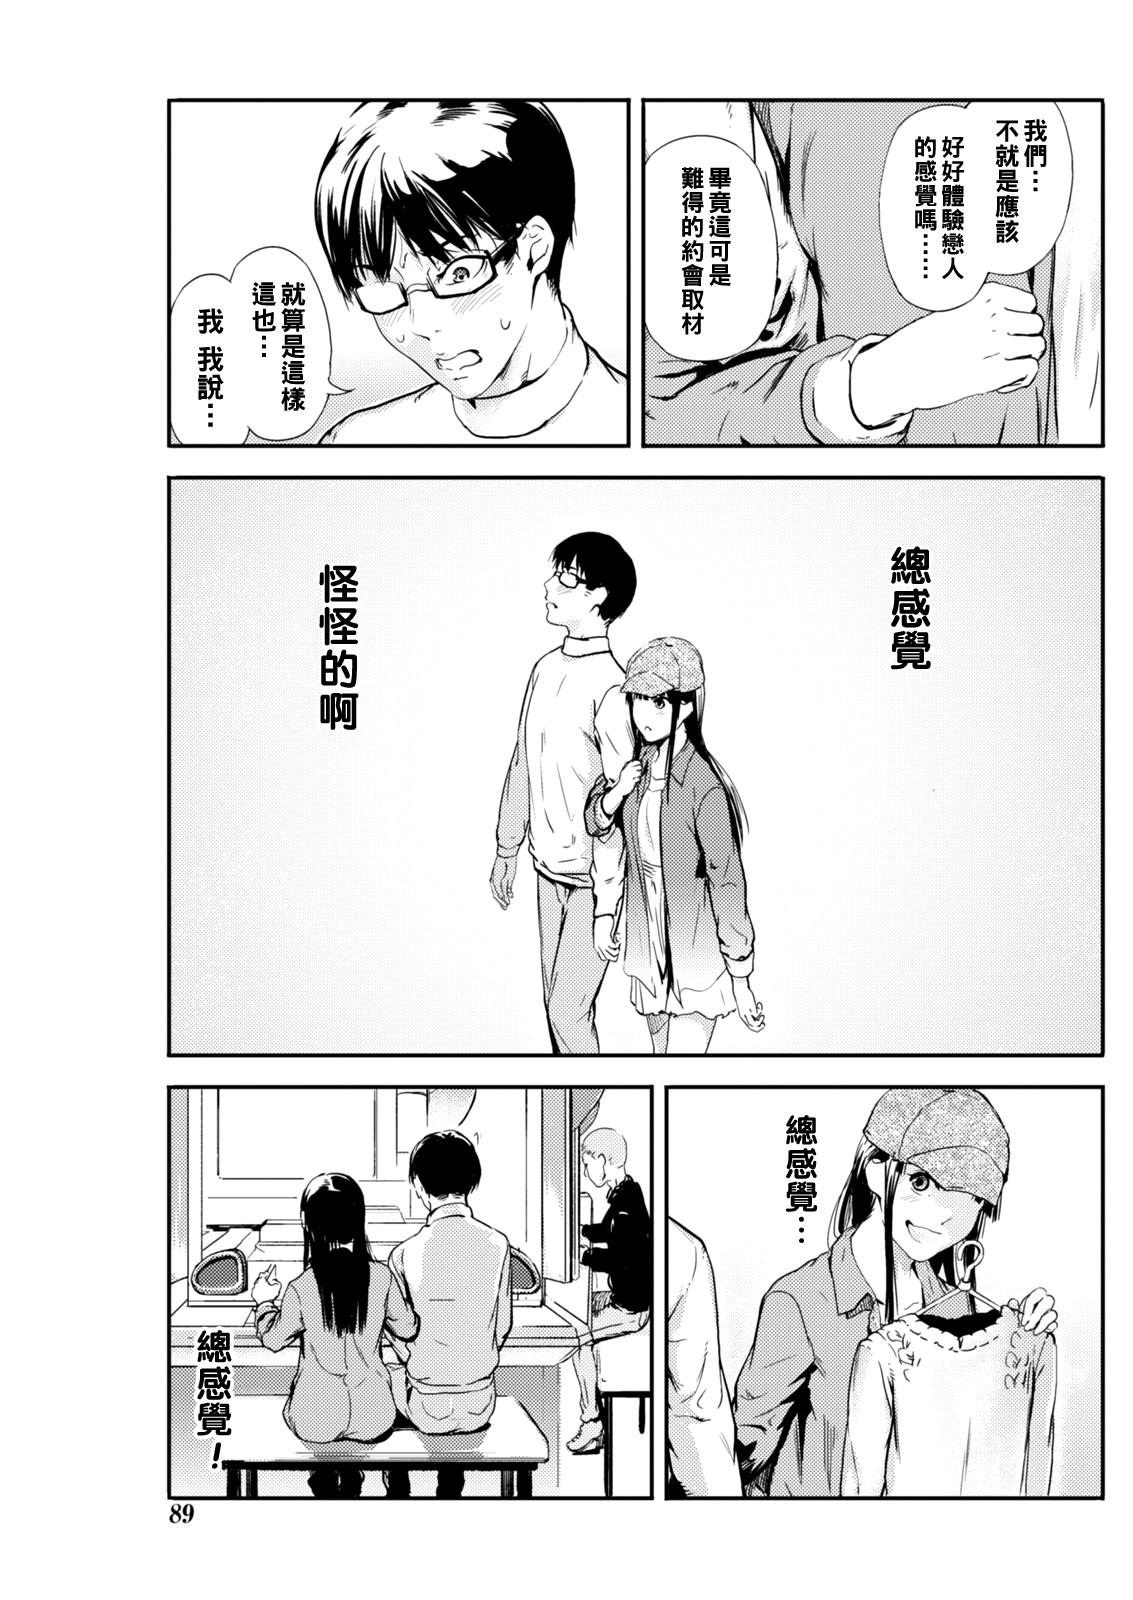 Anal Play 漫画ガール（Chinese） Tanned - Page 5